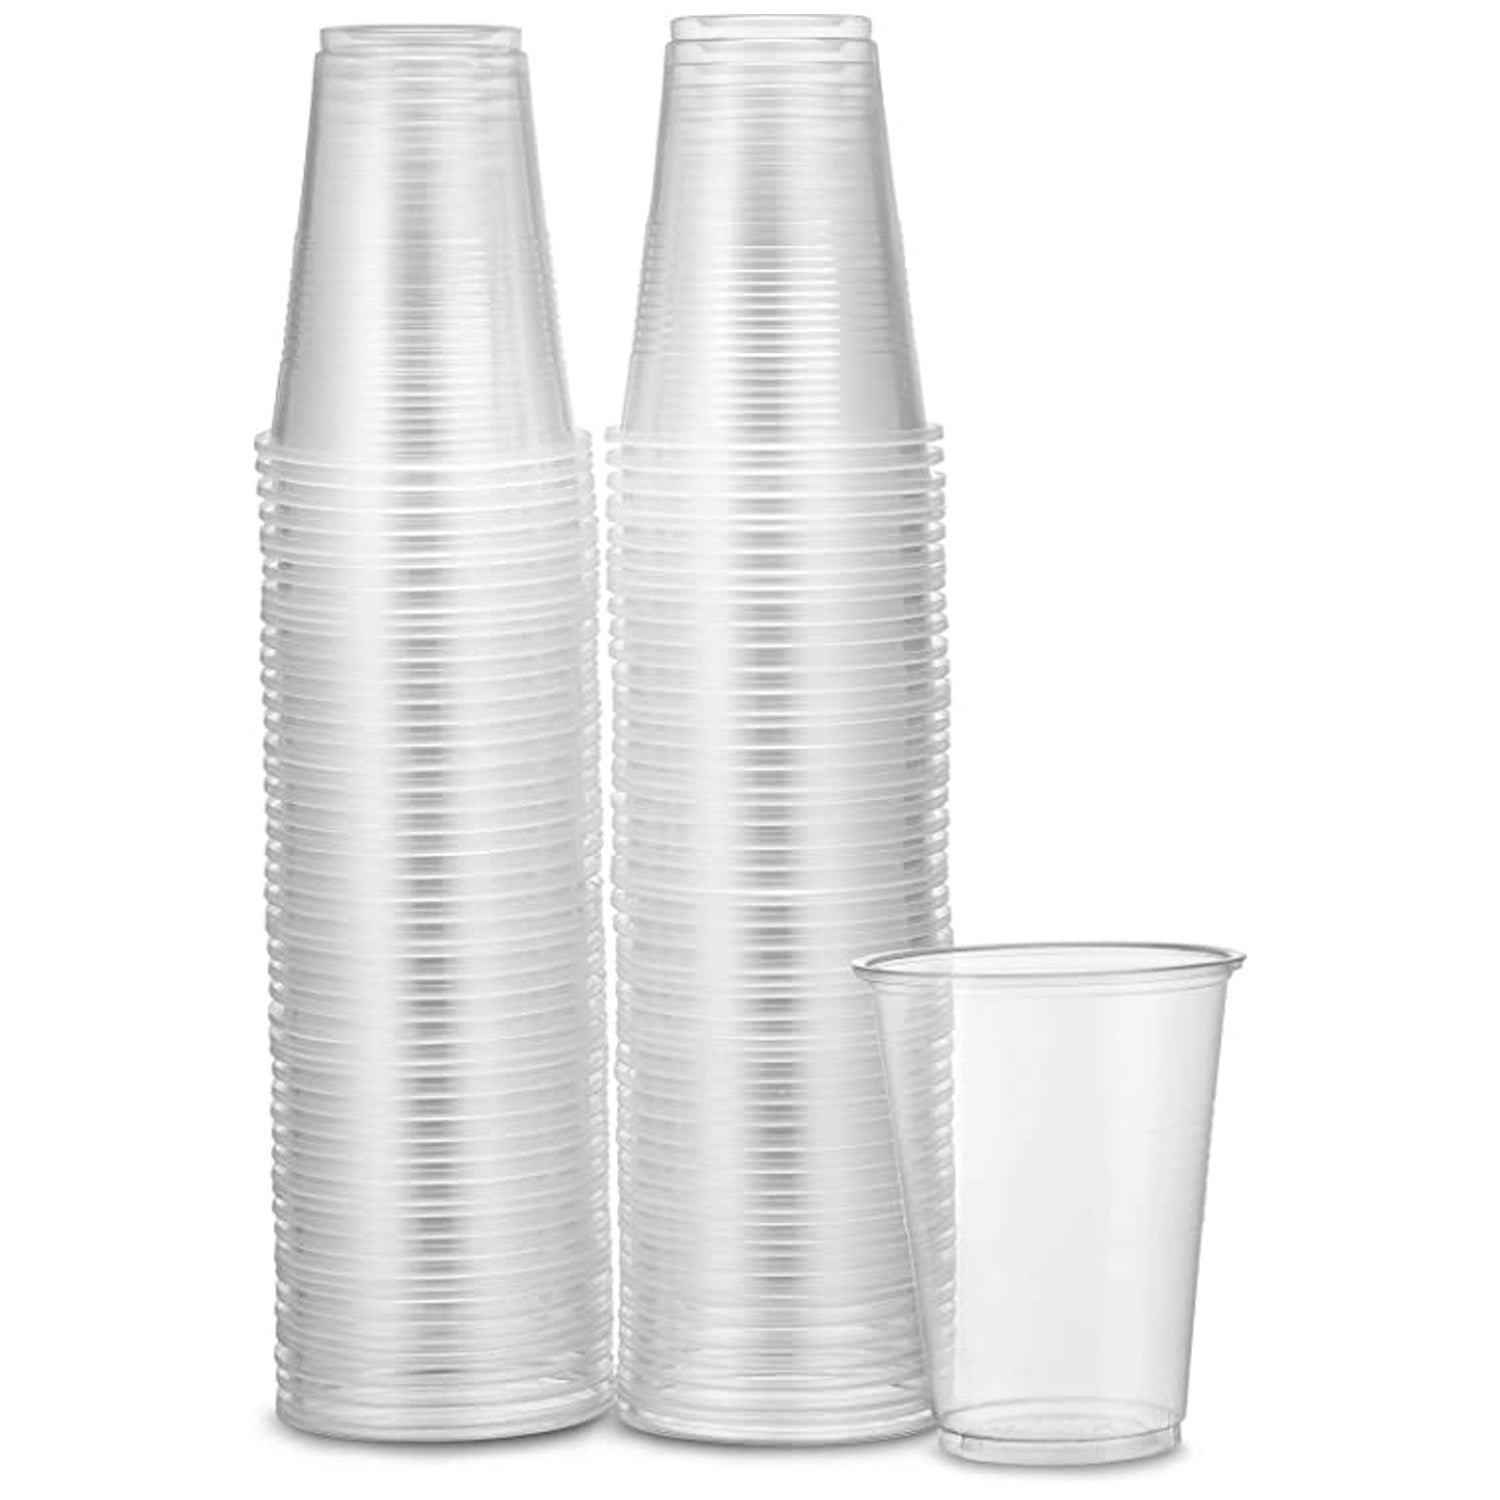 Disposable Clear Plastic Coffee Mug - 8 Pack Durable Party Cups